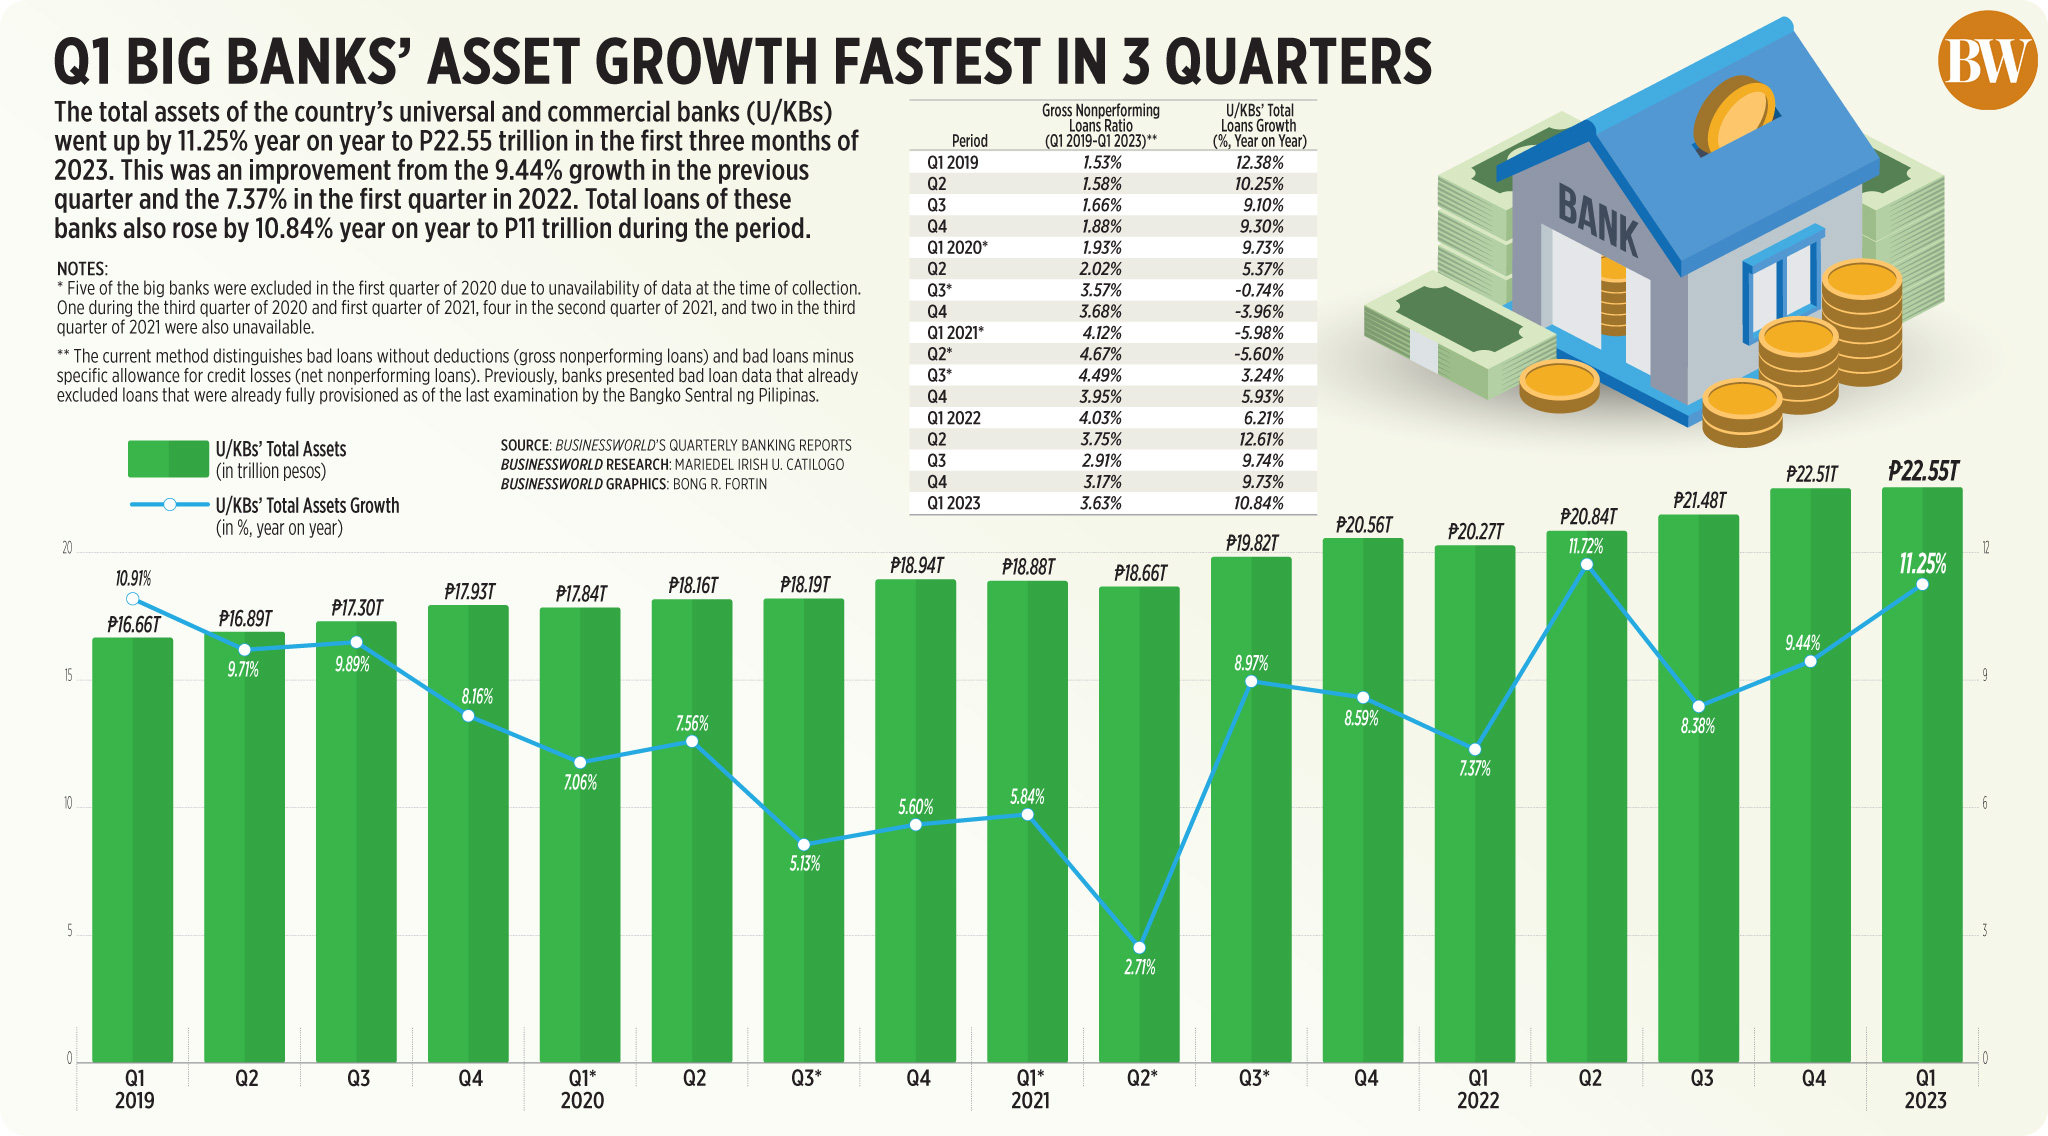 Q1 big banks’ asset growth fastest in 3 quarters